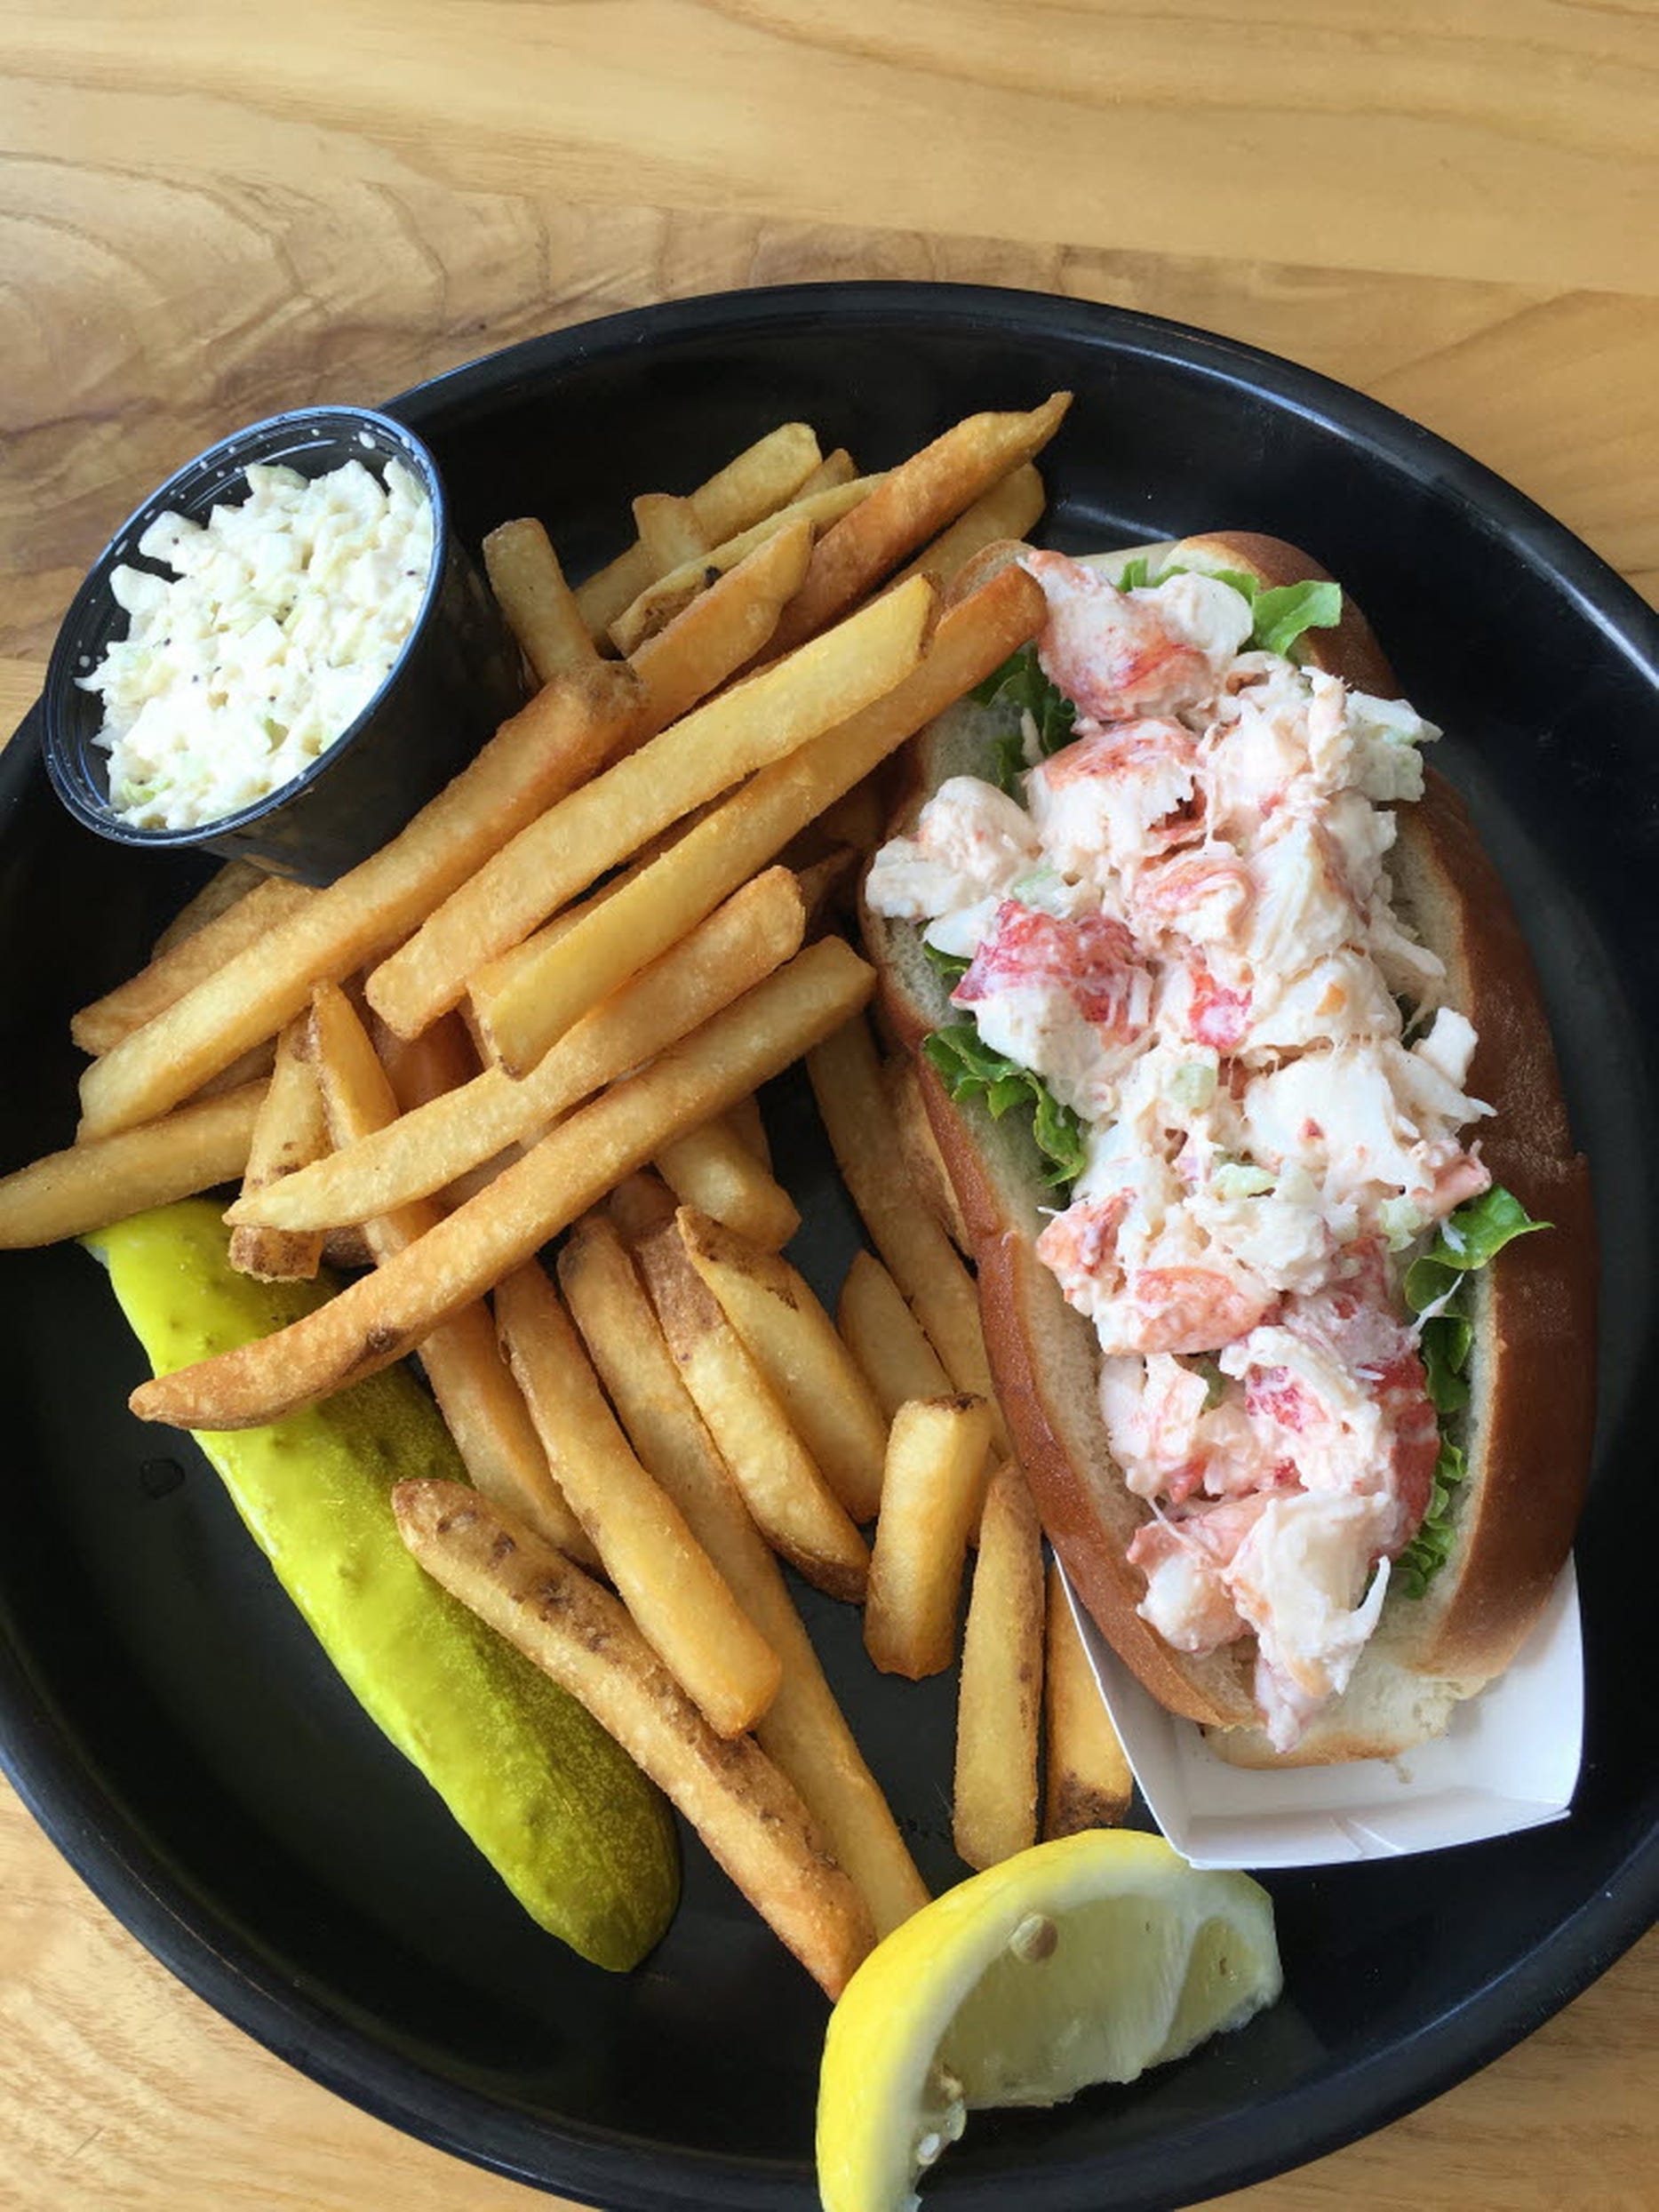 Anthony's Seafood in Middletown serves up nearly a half-pound of hand-picked meat with a little peppered mayonnaise and chopped celery. A leaf of lettuce placed between the bun and the lobster helps prevent sogginess.